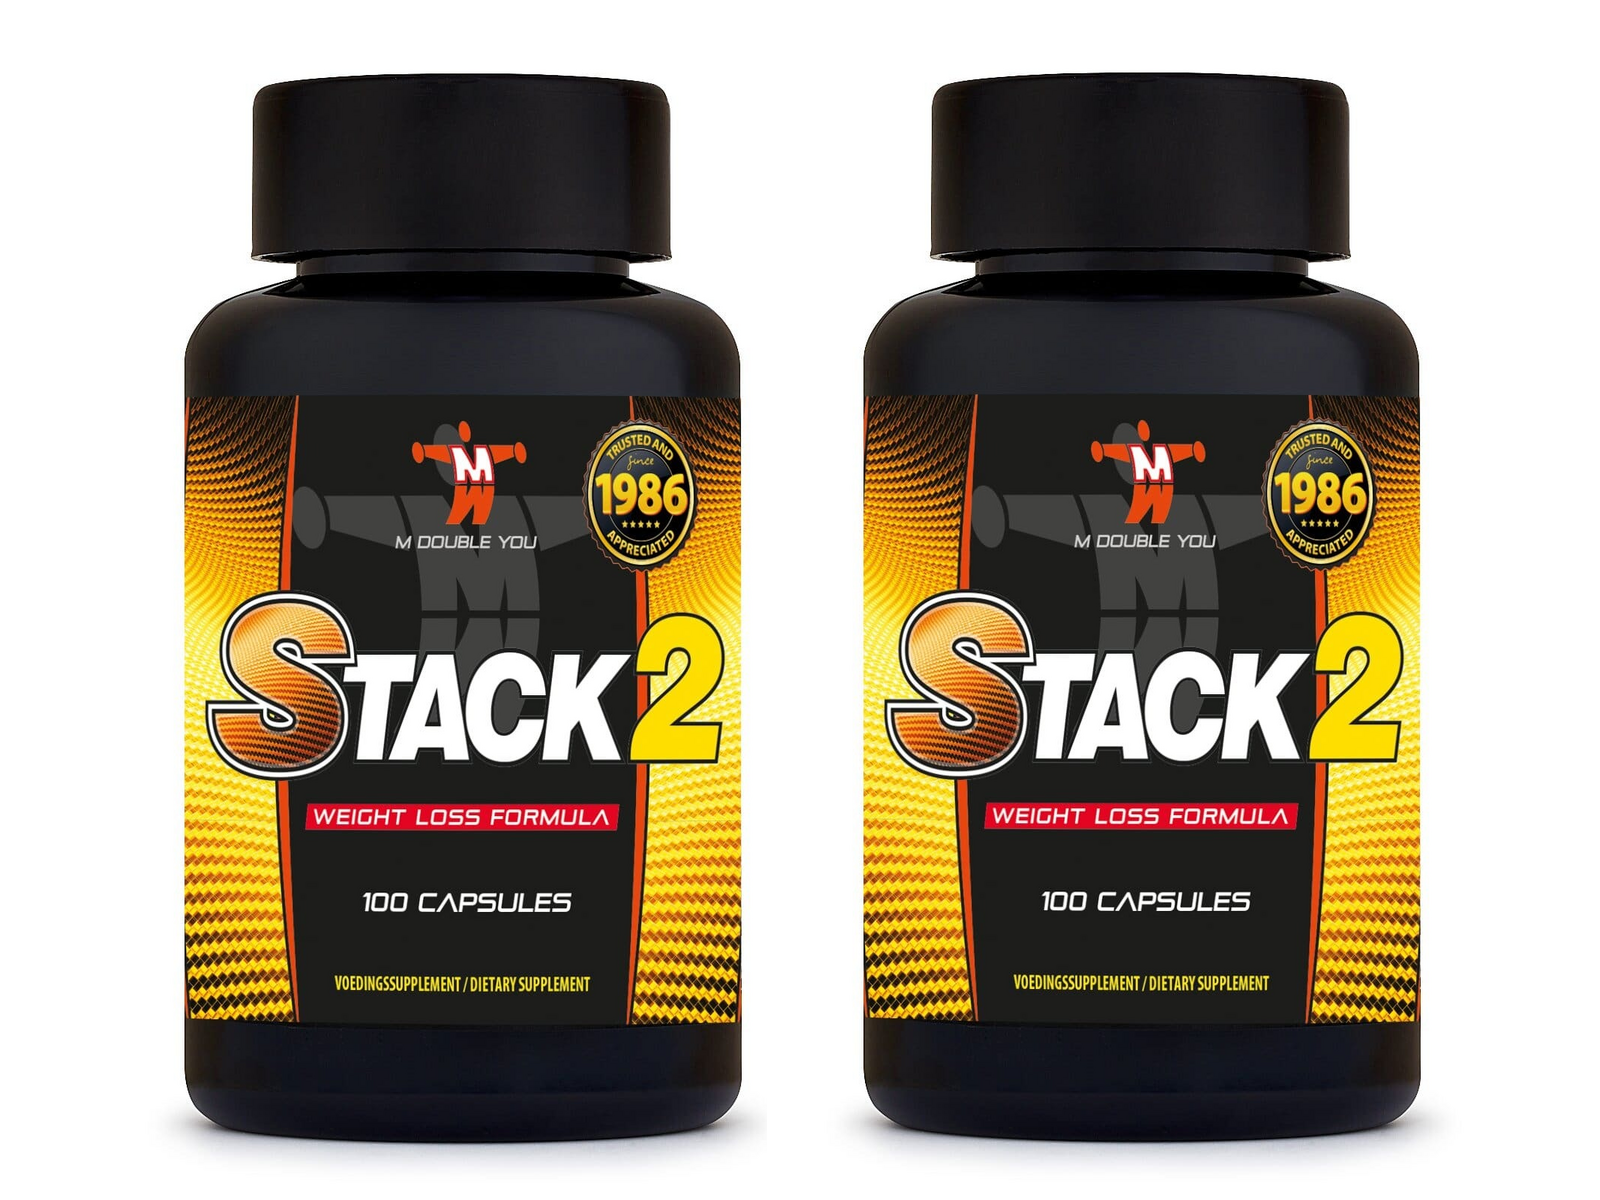 Stack 2 (100 capsules (2-pack) - Bundel) - M DOUBLE YOU